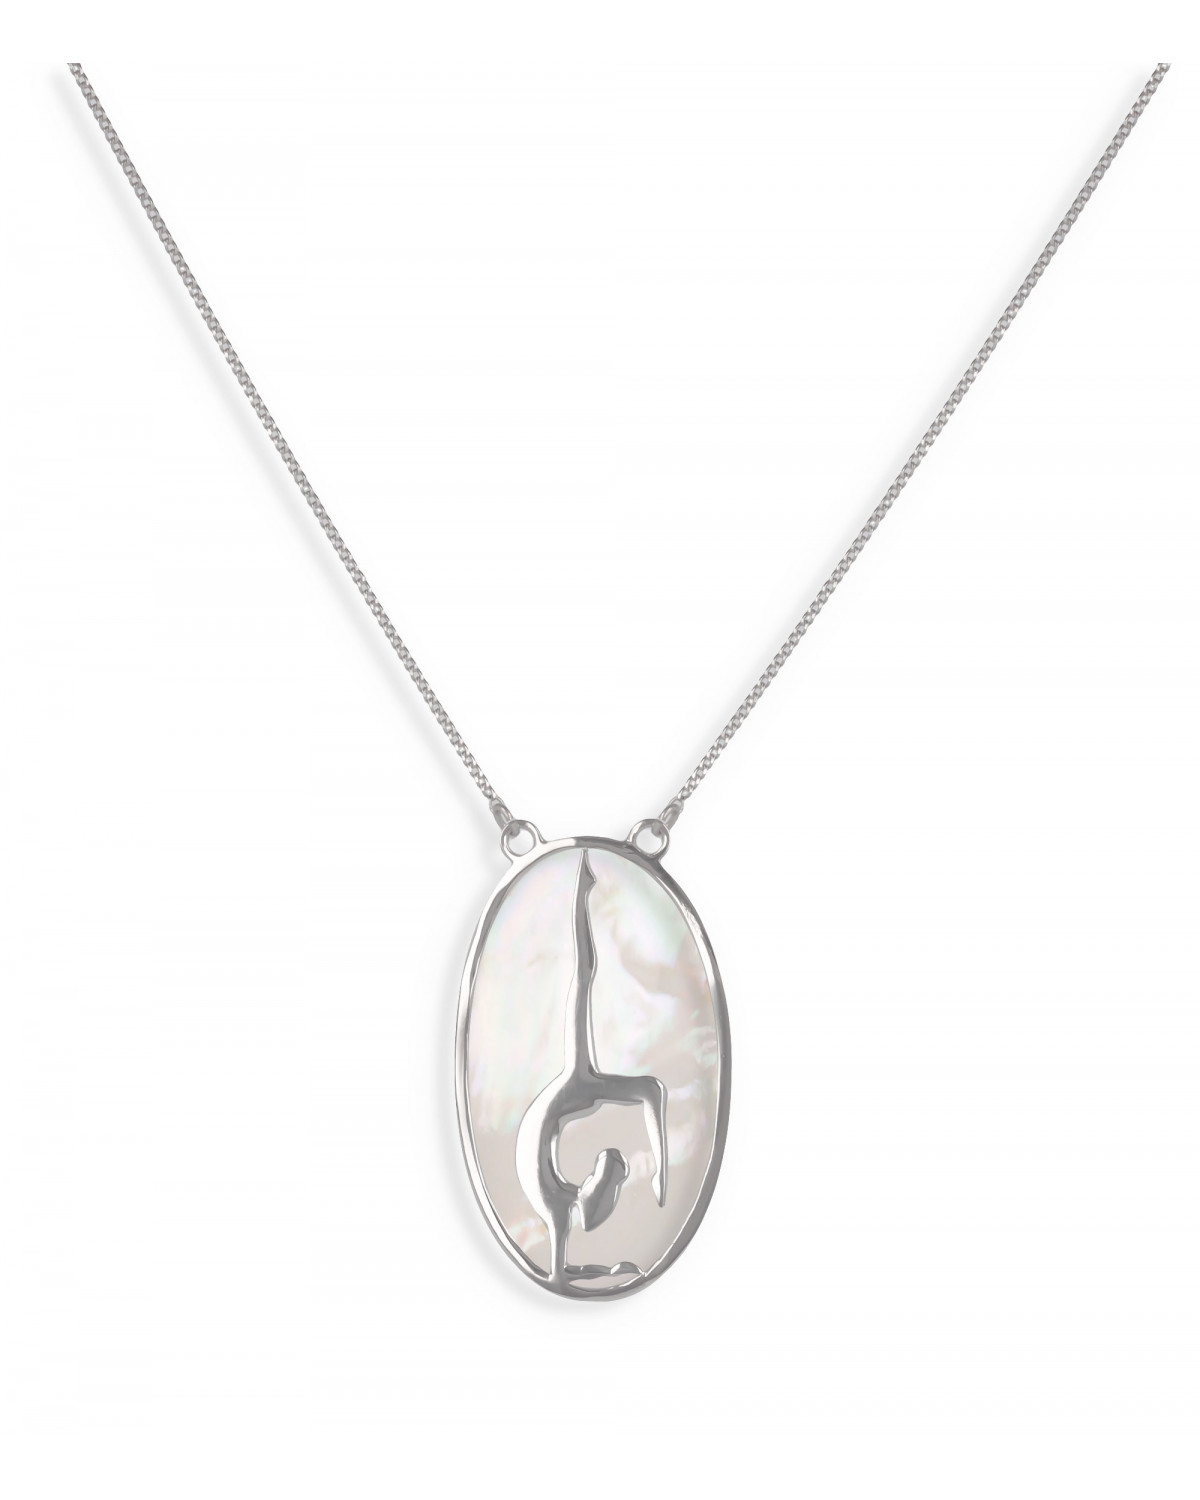 Gift Idea Jewelry Zen Collection-Necklace-mother-of-pearl-yoga- Sterling Silver-oval-Woman